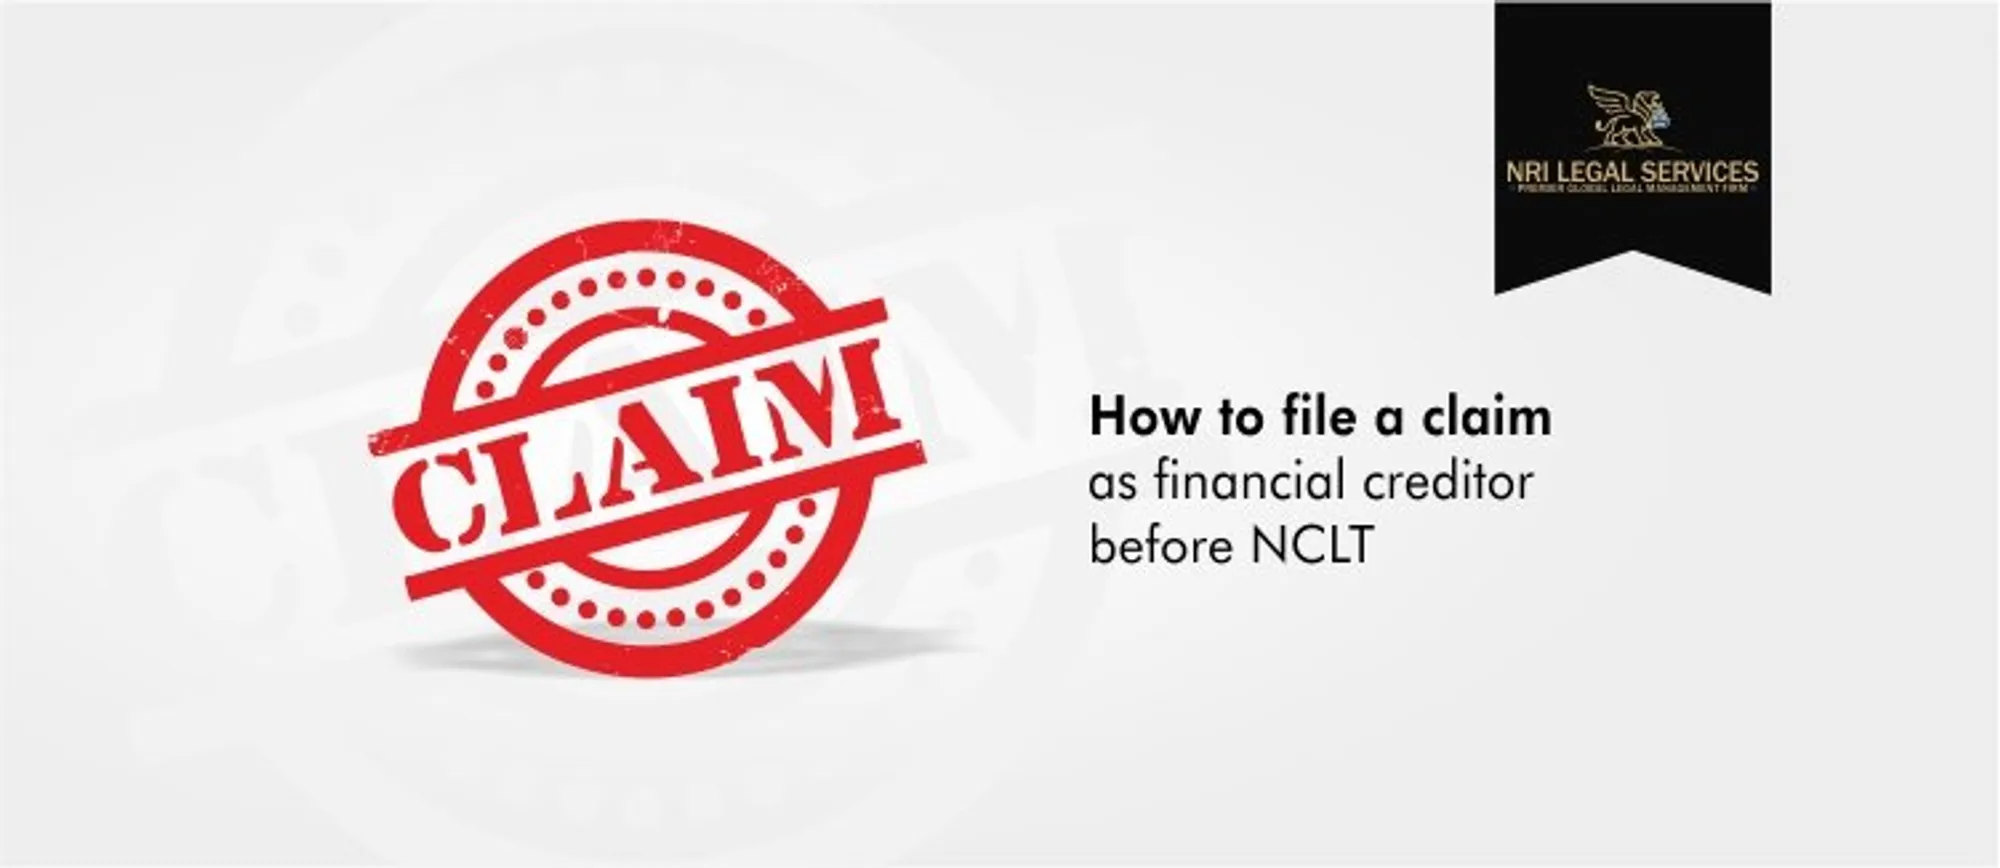 How to File a Claim as Financial Creditor Before NCLT